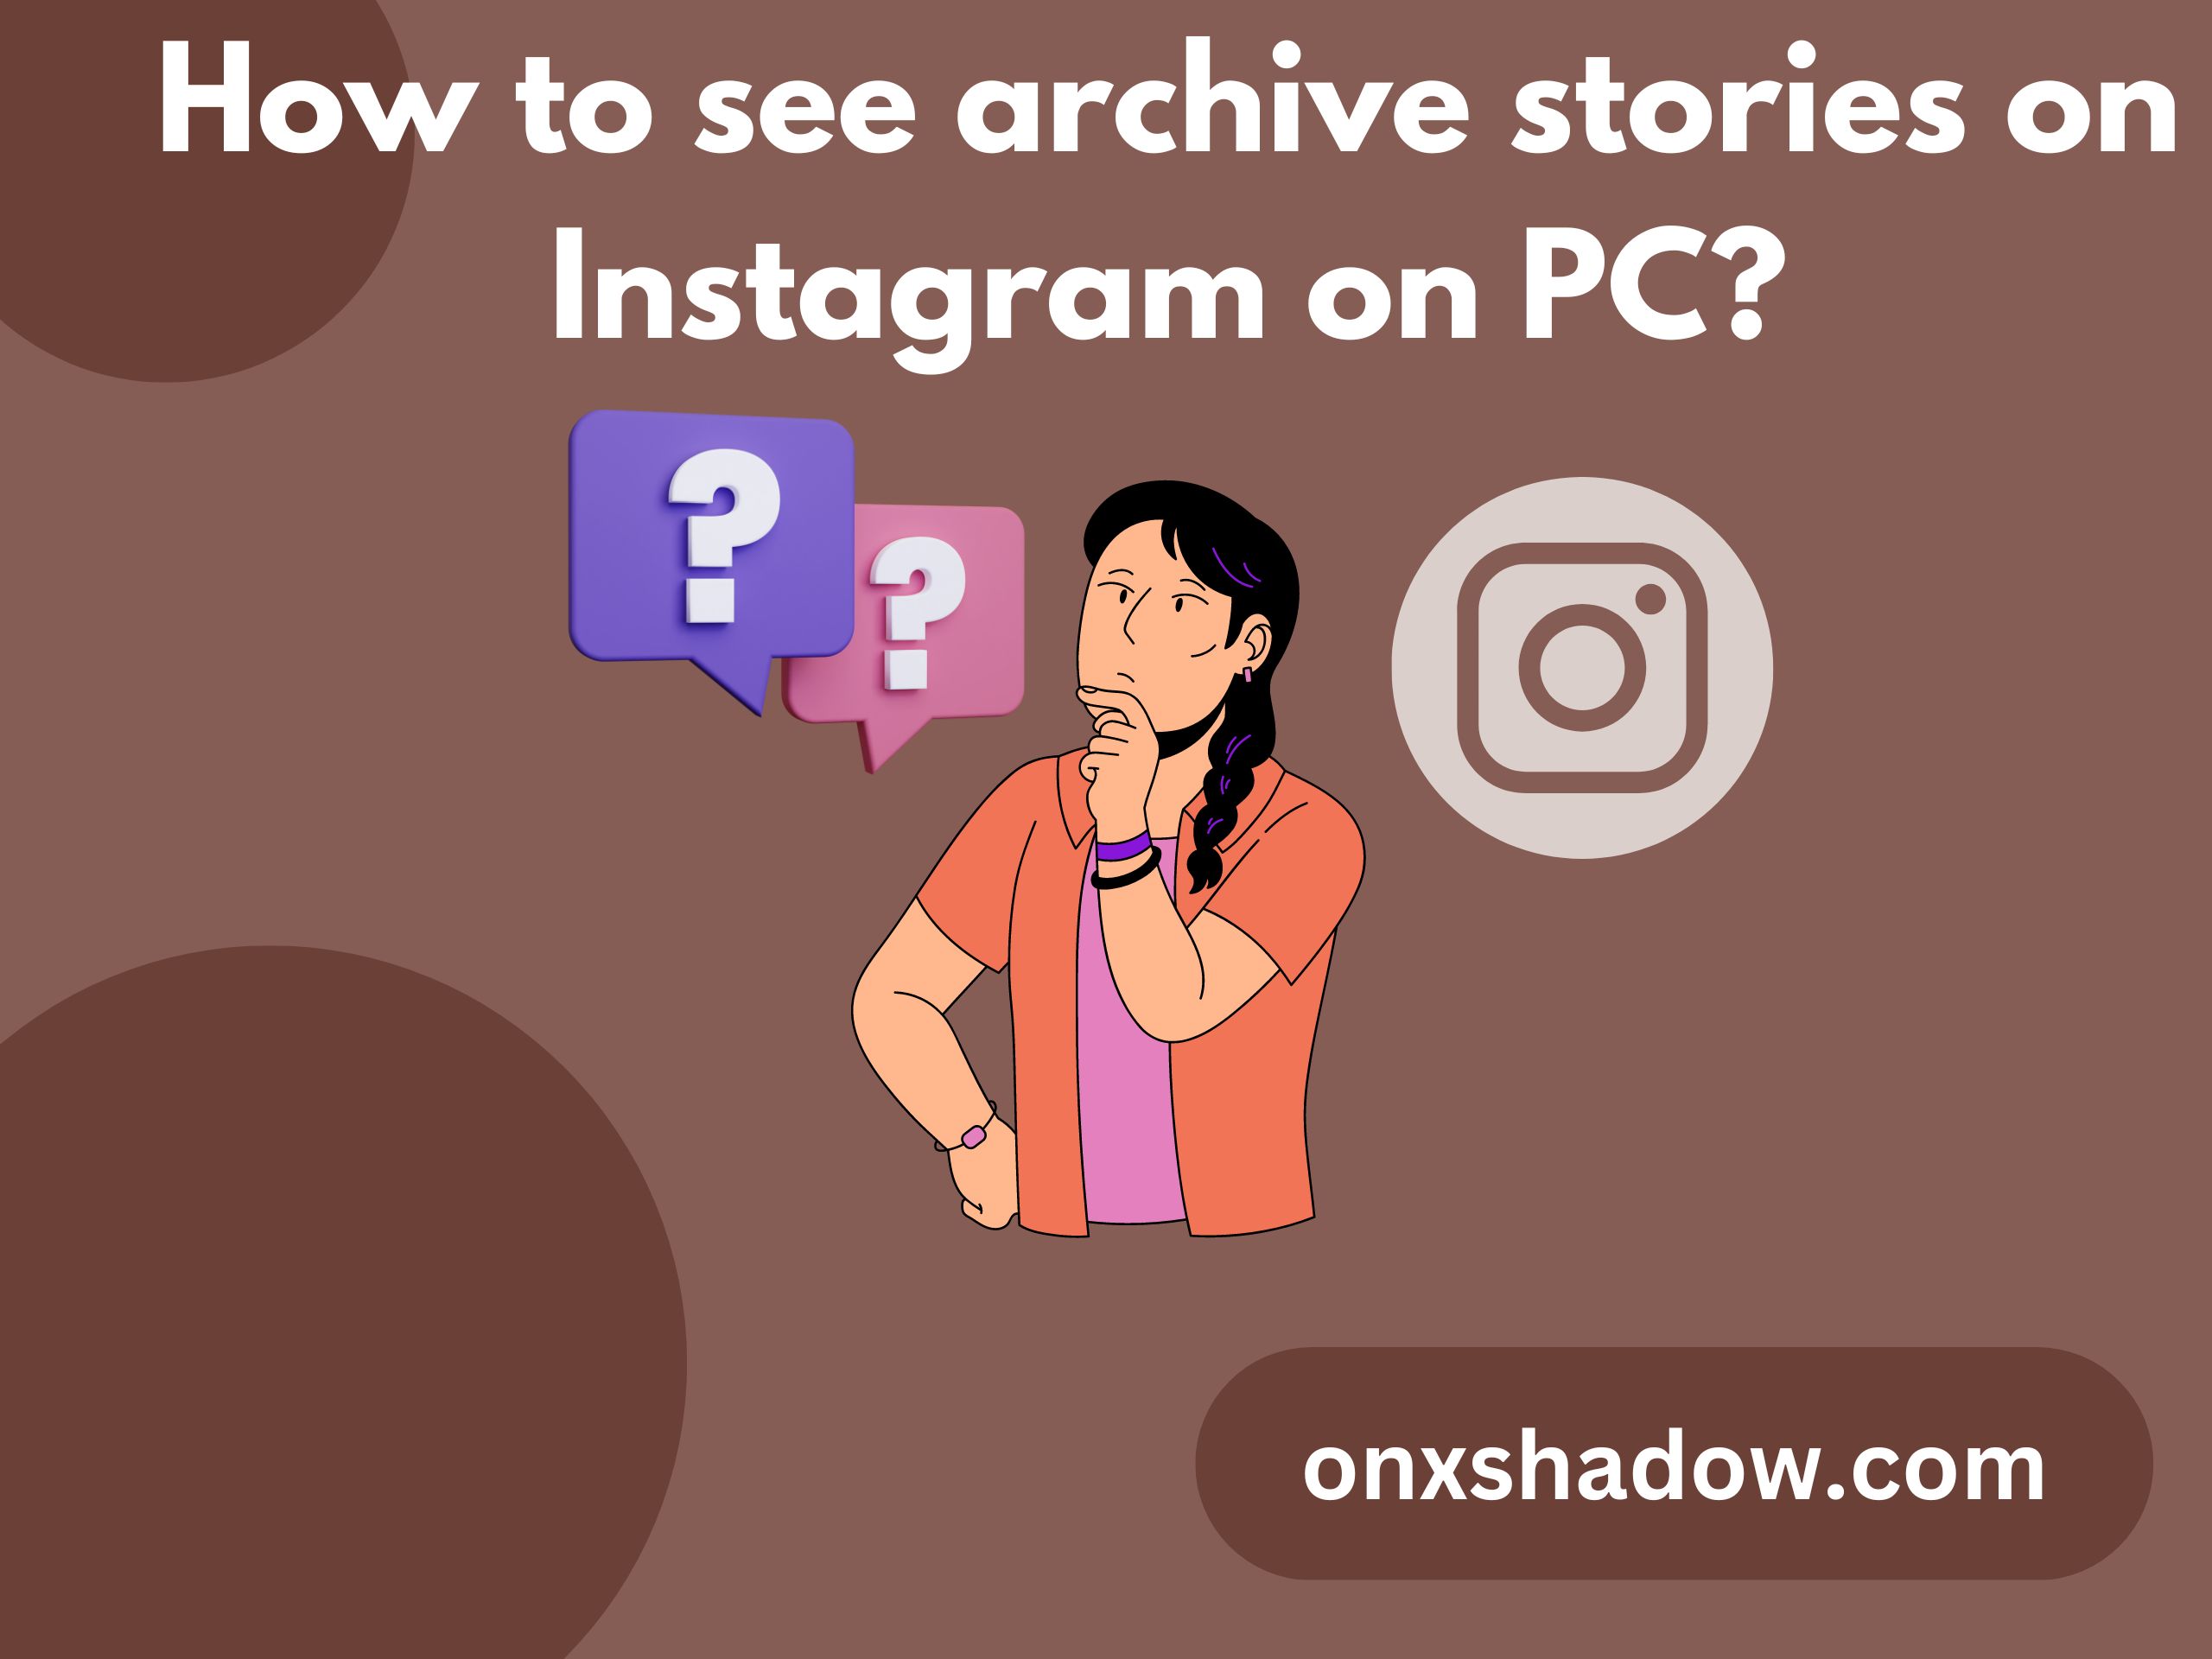 How to see archive stories on Instagram on PC?